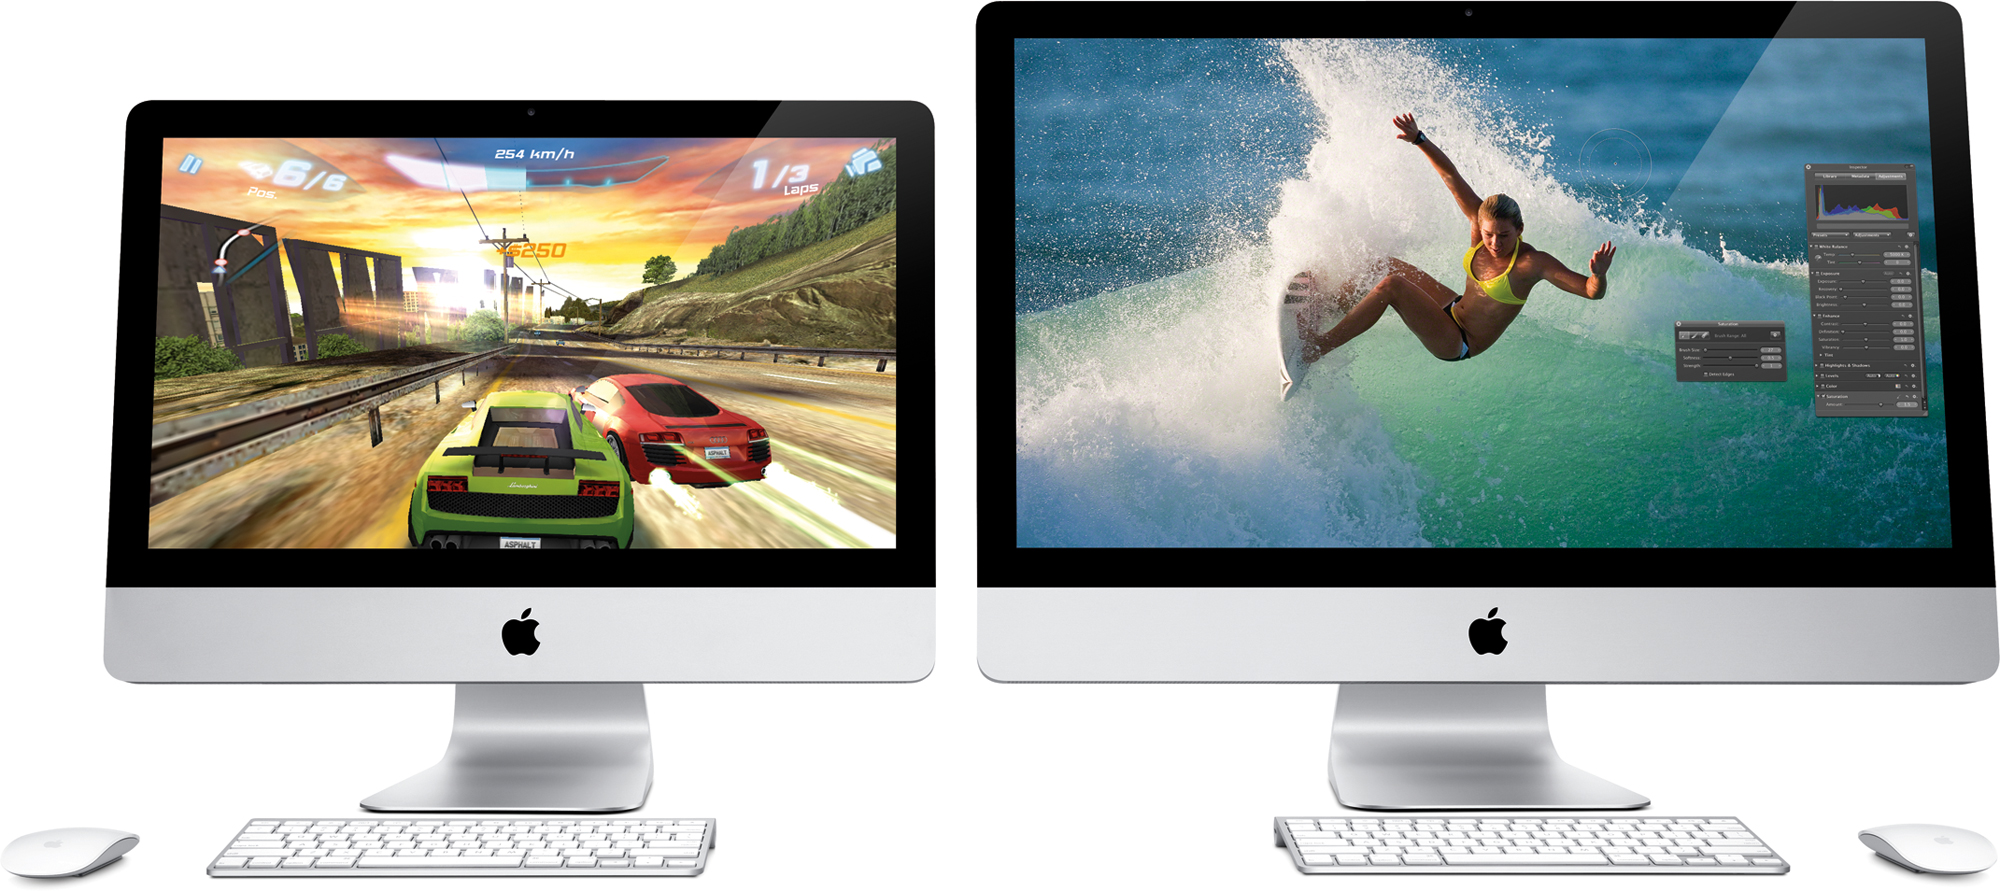 ↪ Another rumor points to the arrival of new iMacs for June